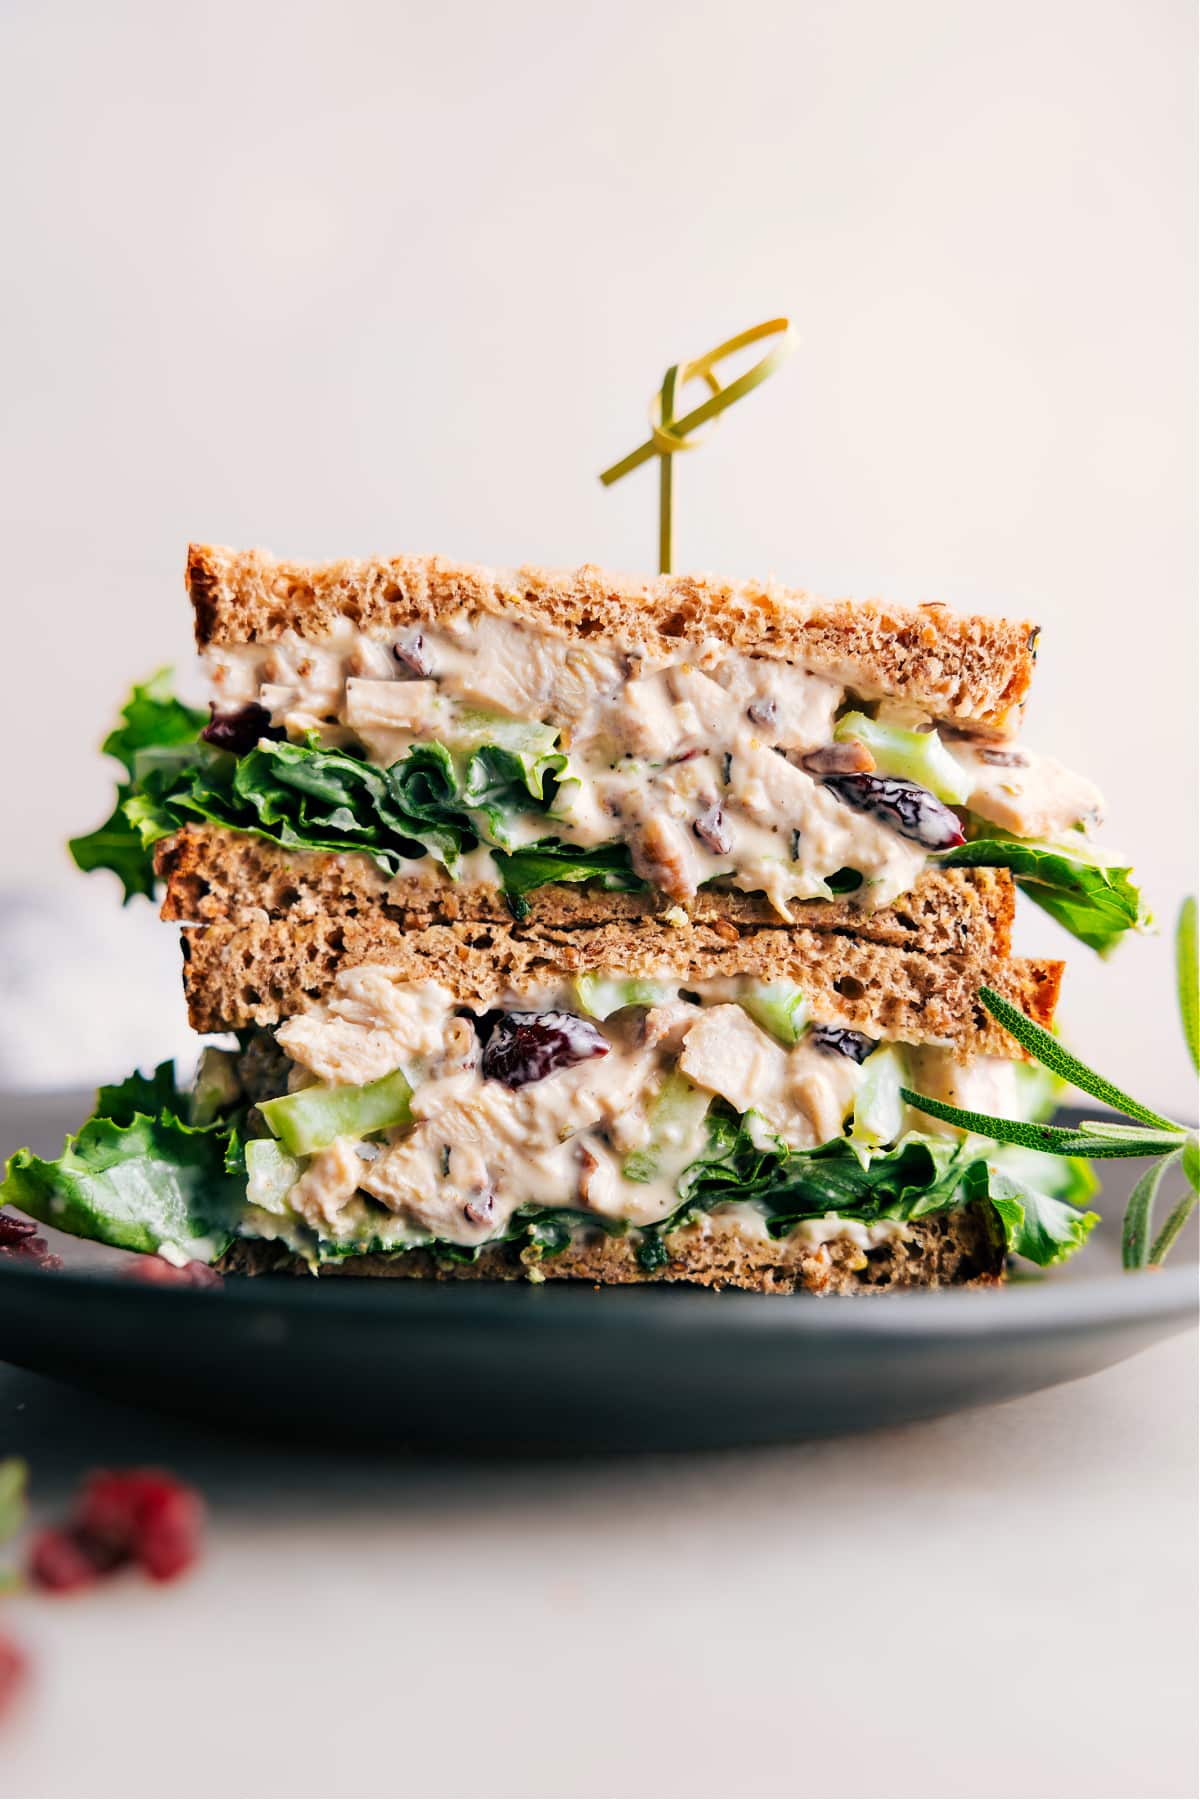 Scrumptious rosemary chicken salad sandwich, halved to reveal its generous, flavorful filling.